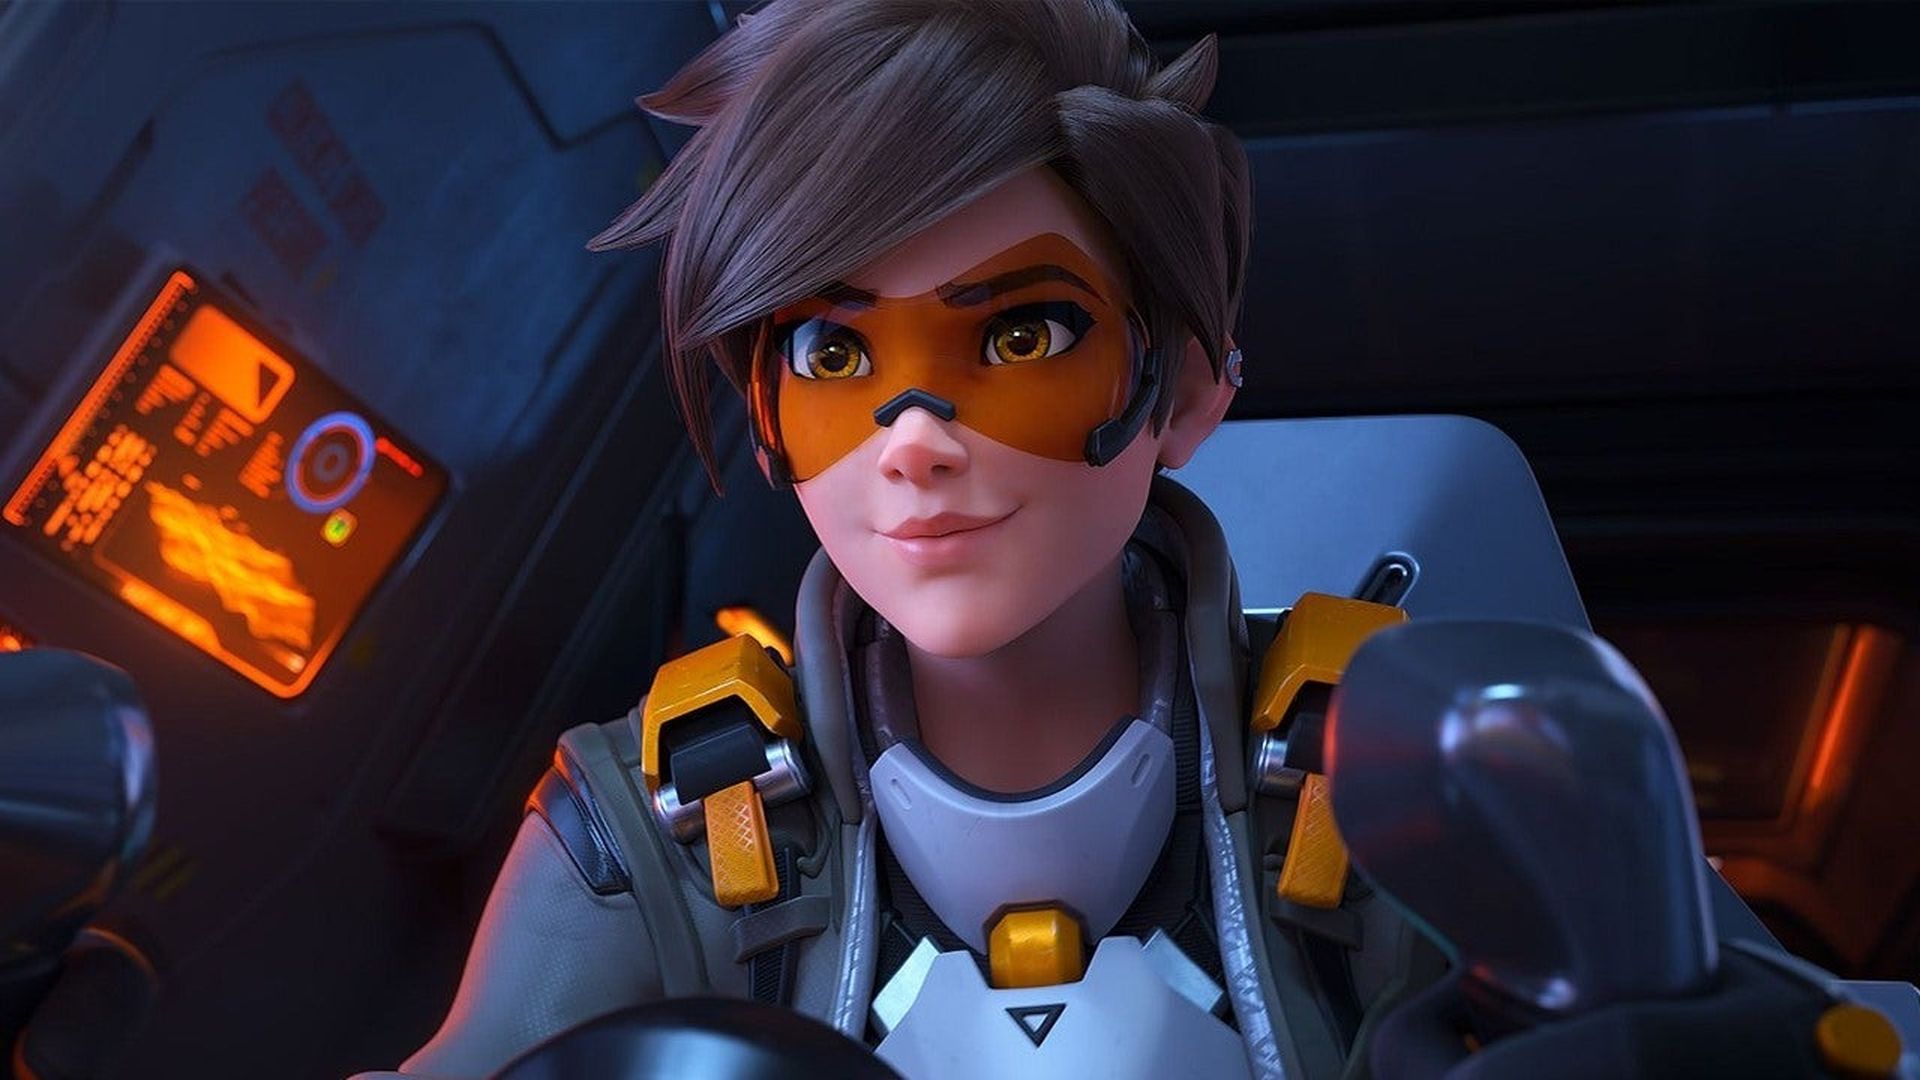 In this article, we are going to go over how to fix Overwatch 2 beta login error, so you can enjoy the beta testing as much as possible and without delay.